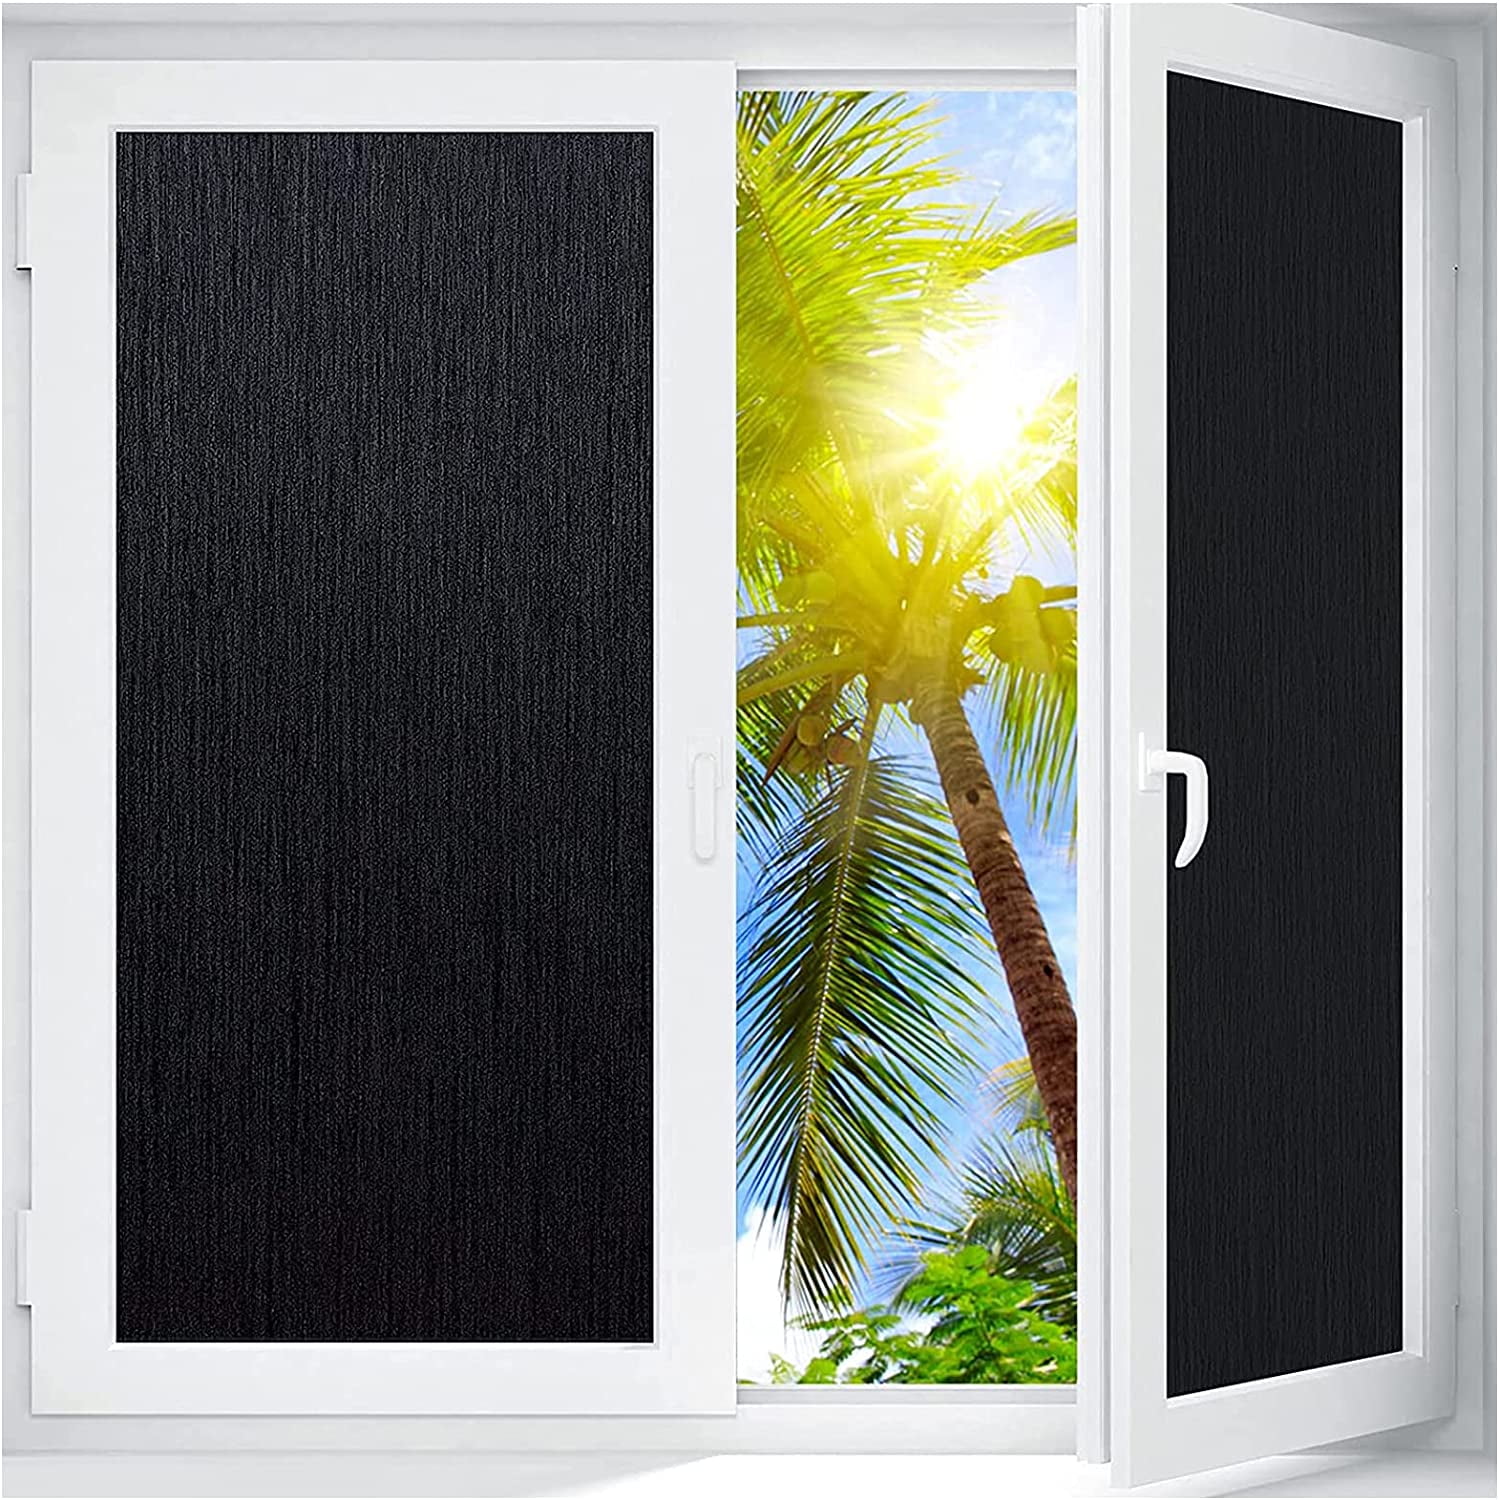 48" X 25 FT ROLL BLACKOUT FILM PRIVACY FOR OFFICE,BATH,GLASS DOORS,STORES,SCHOOL 